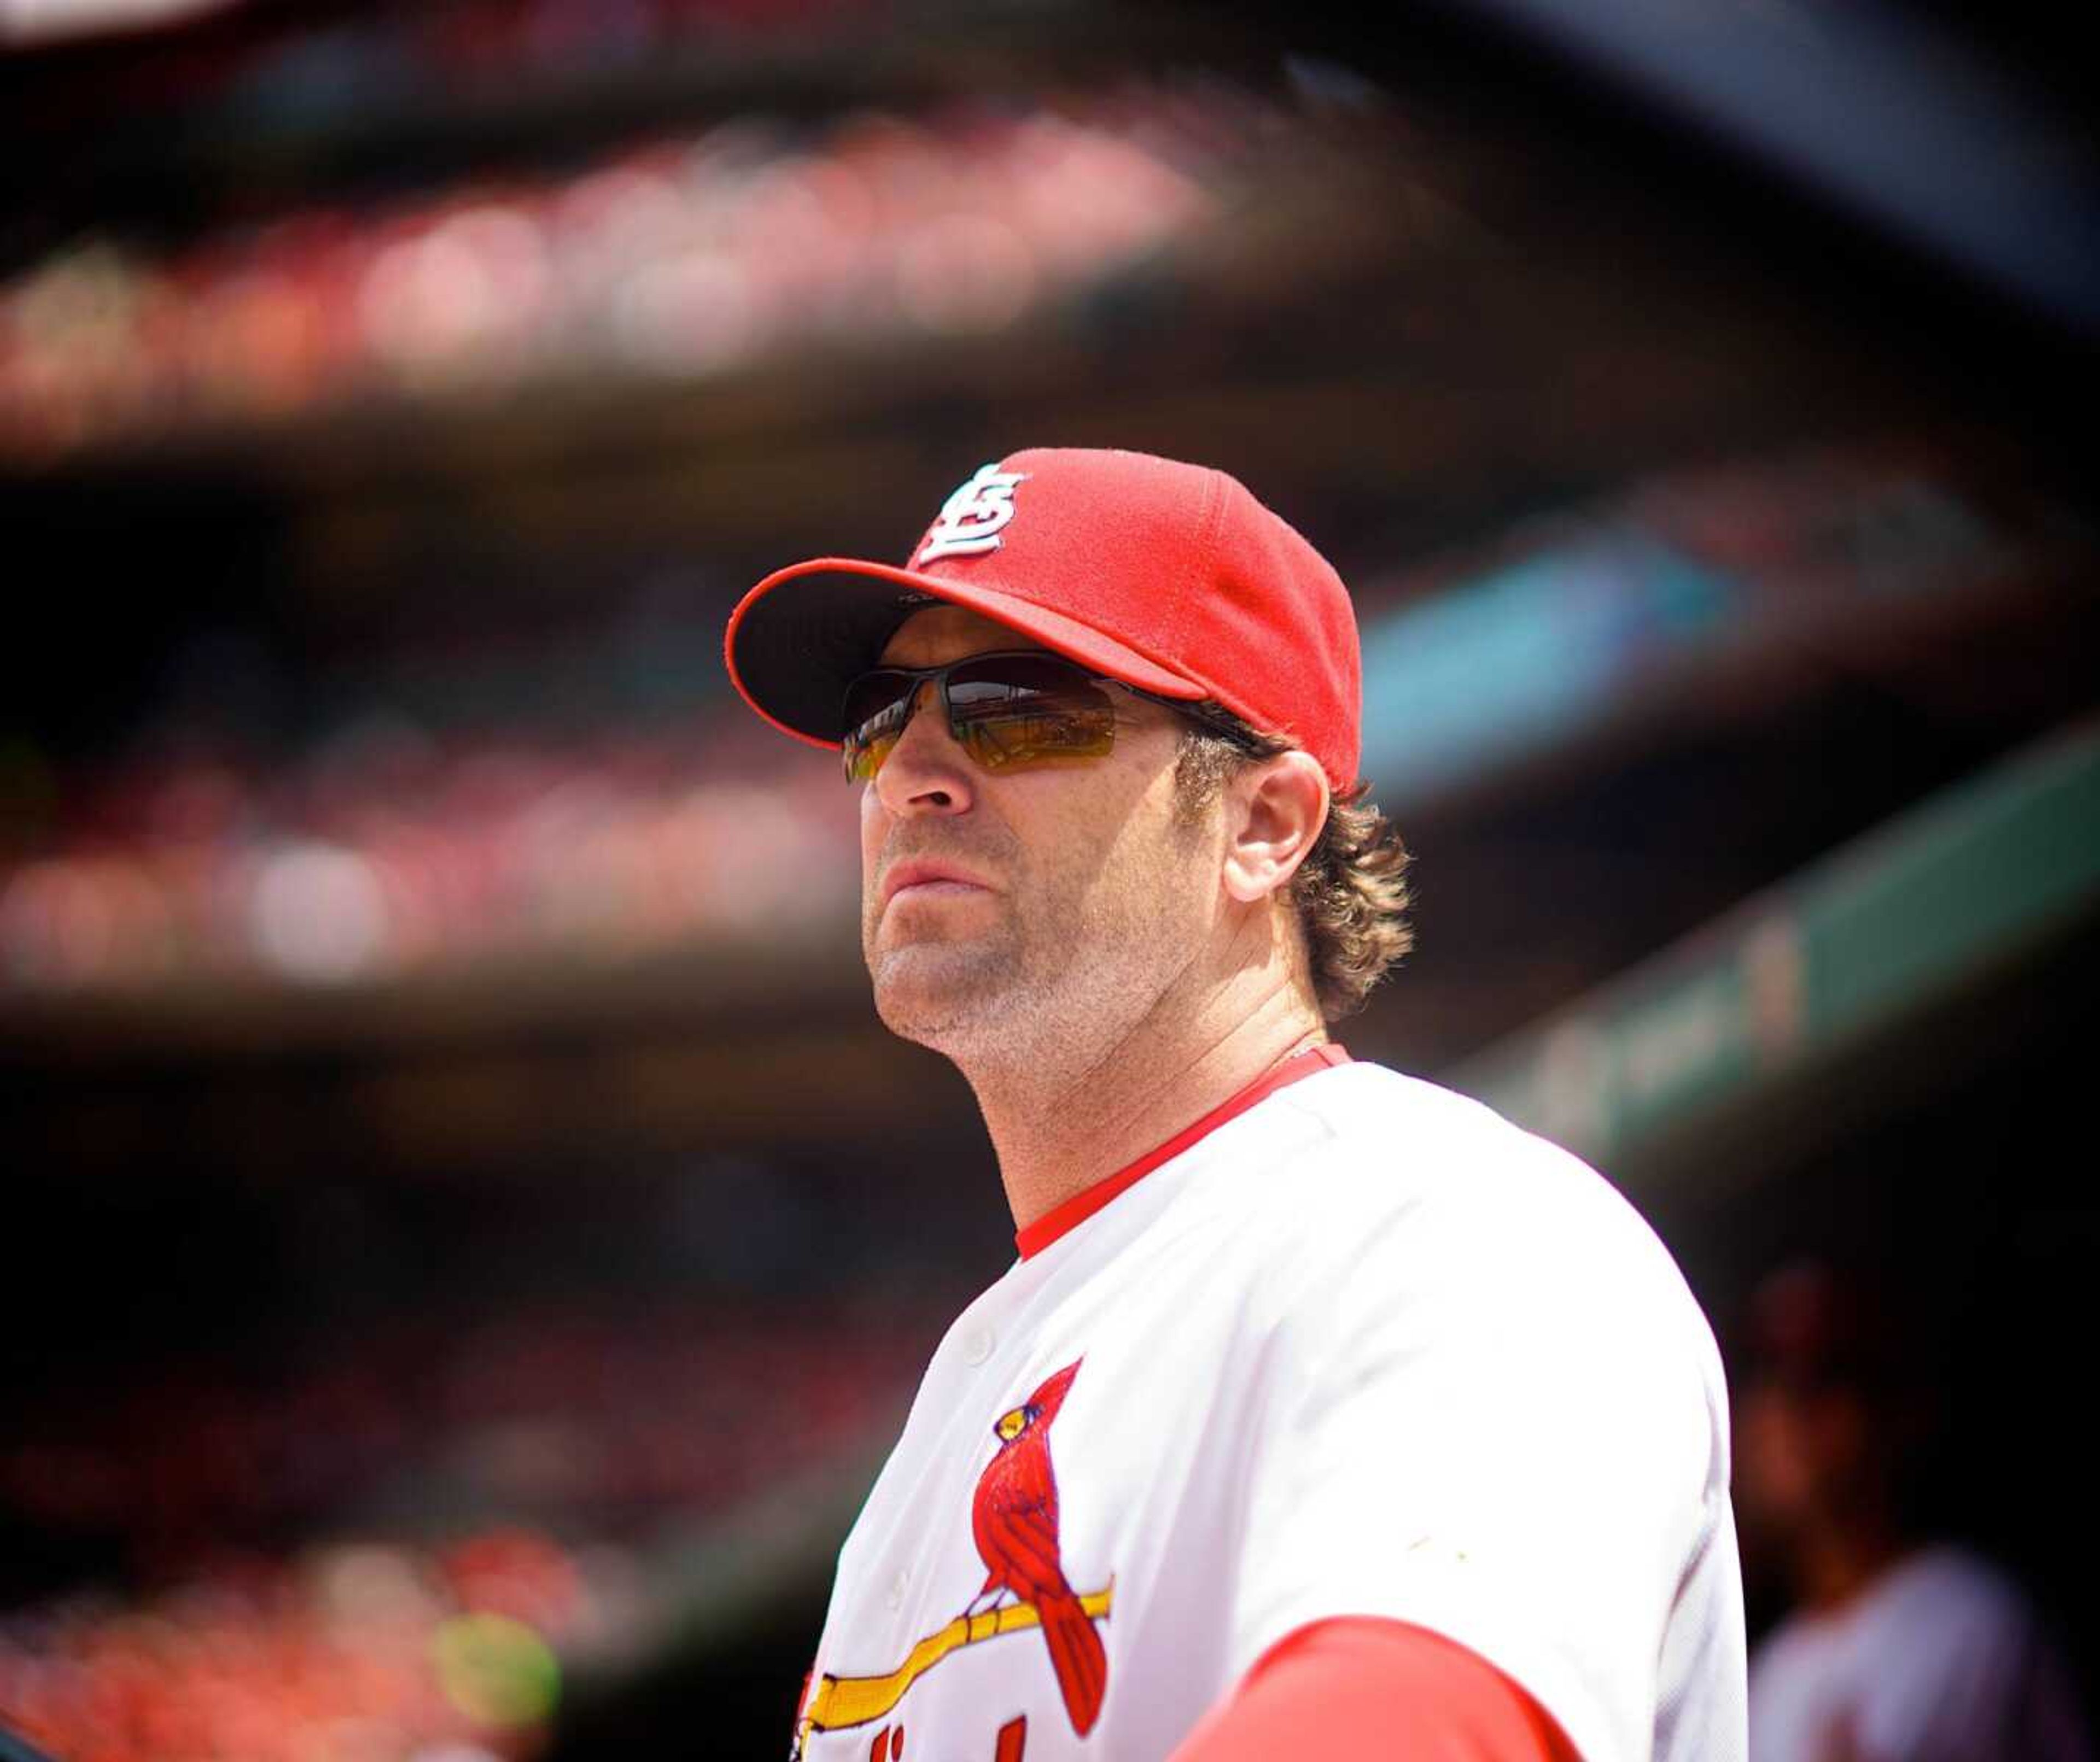 Mike Matheny, St. Louis Cardinals manager, will be the keynote speaker at the Arrow Leadership and Success Summit at 7 p.m. on Nov. 17 in the Show Me Center.